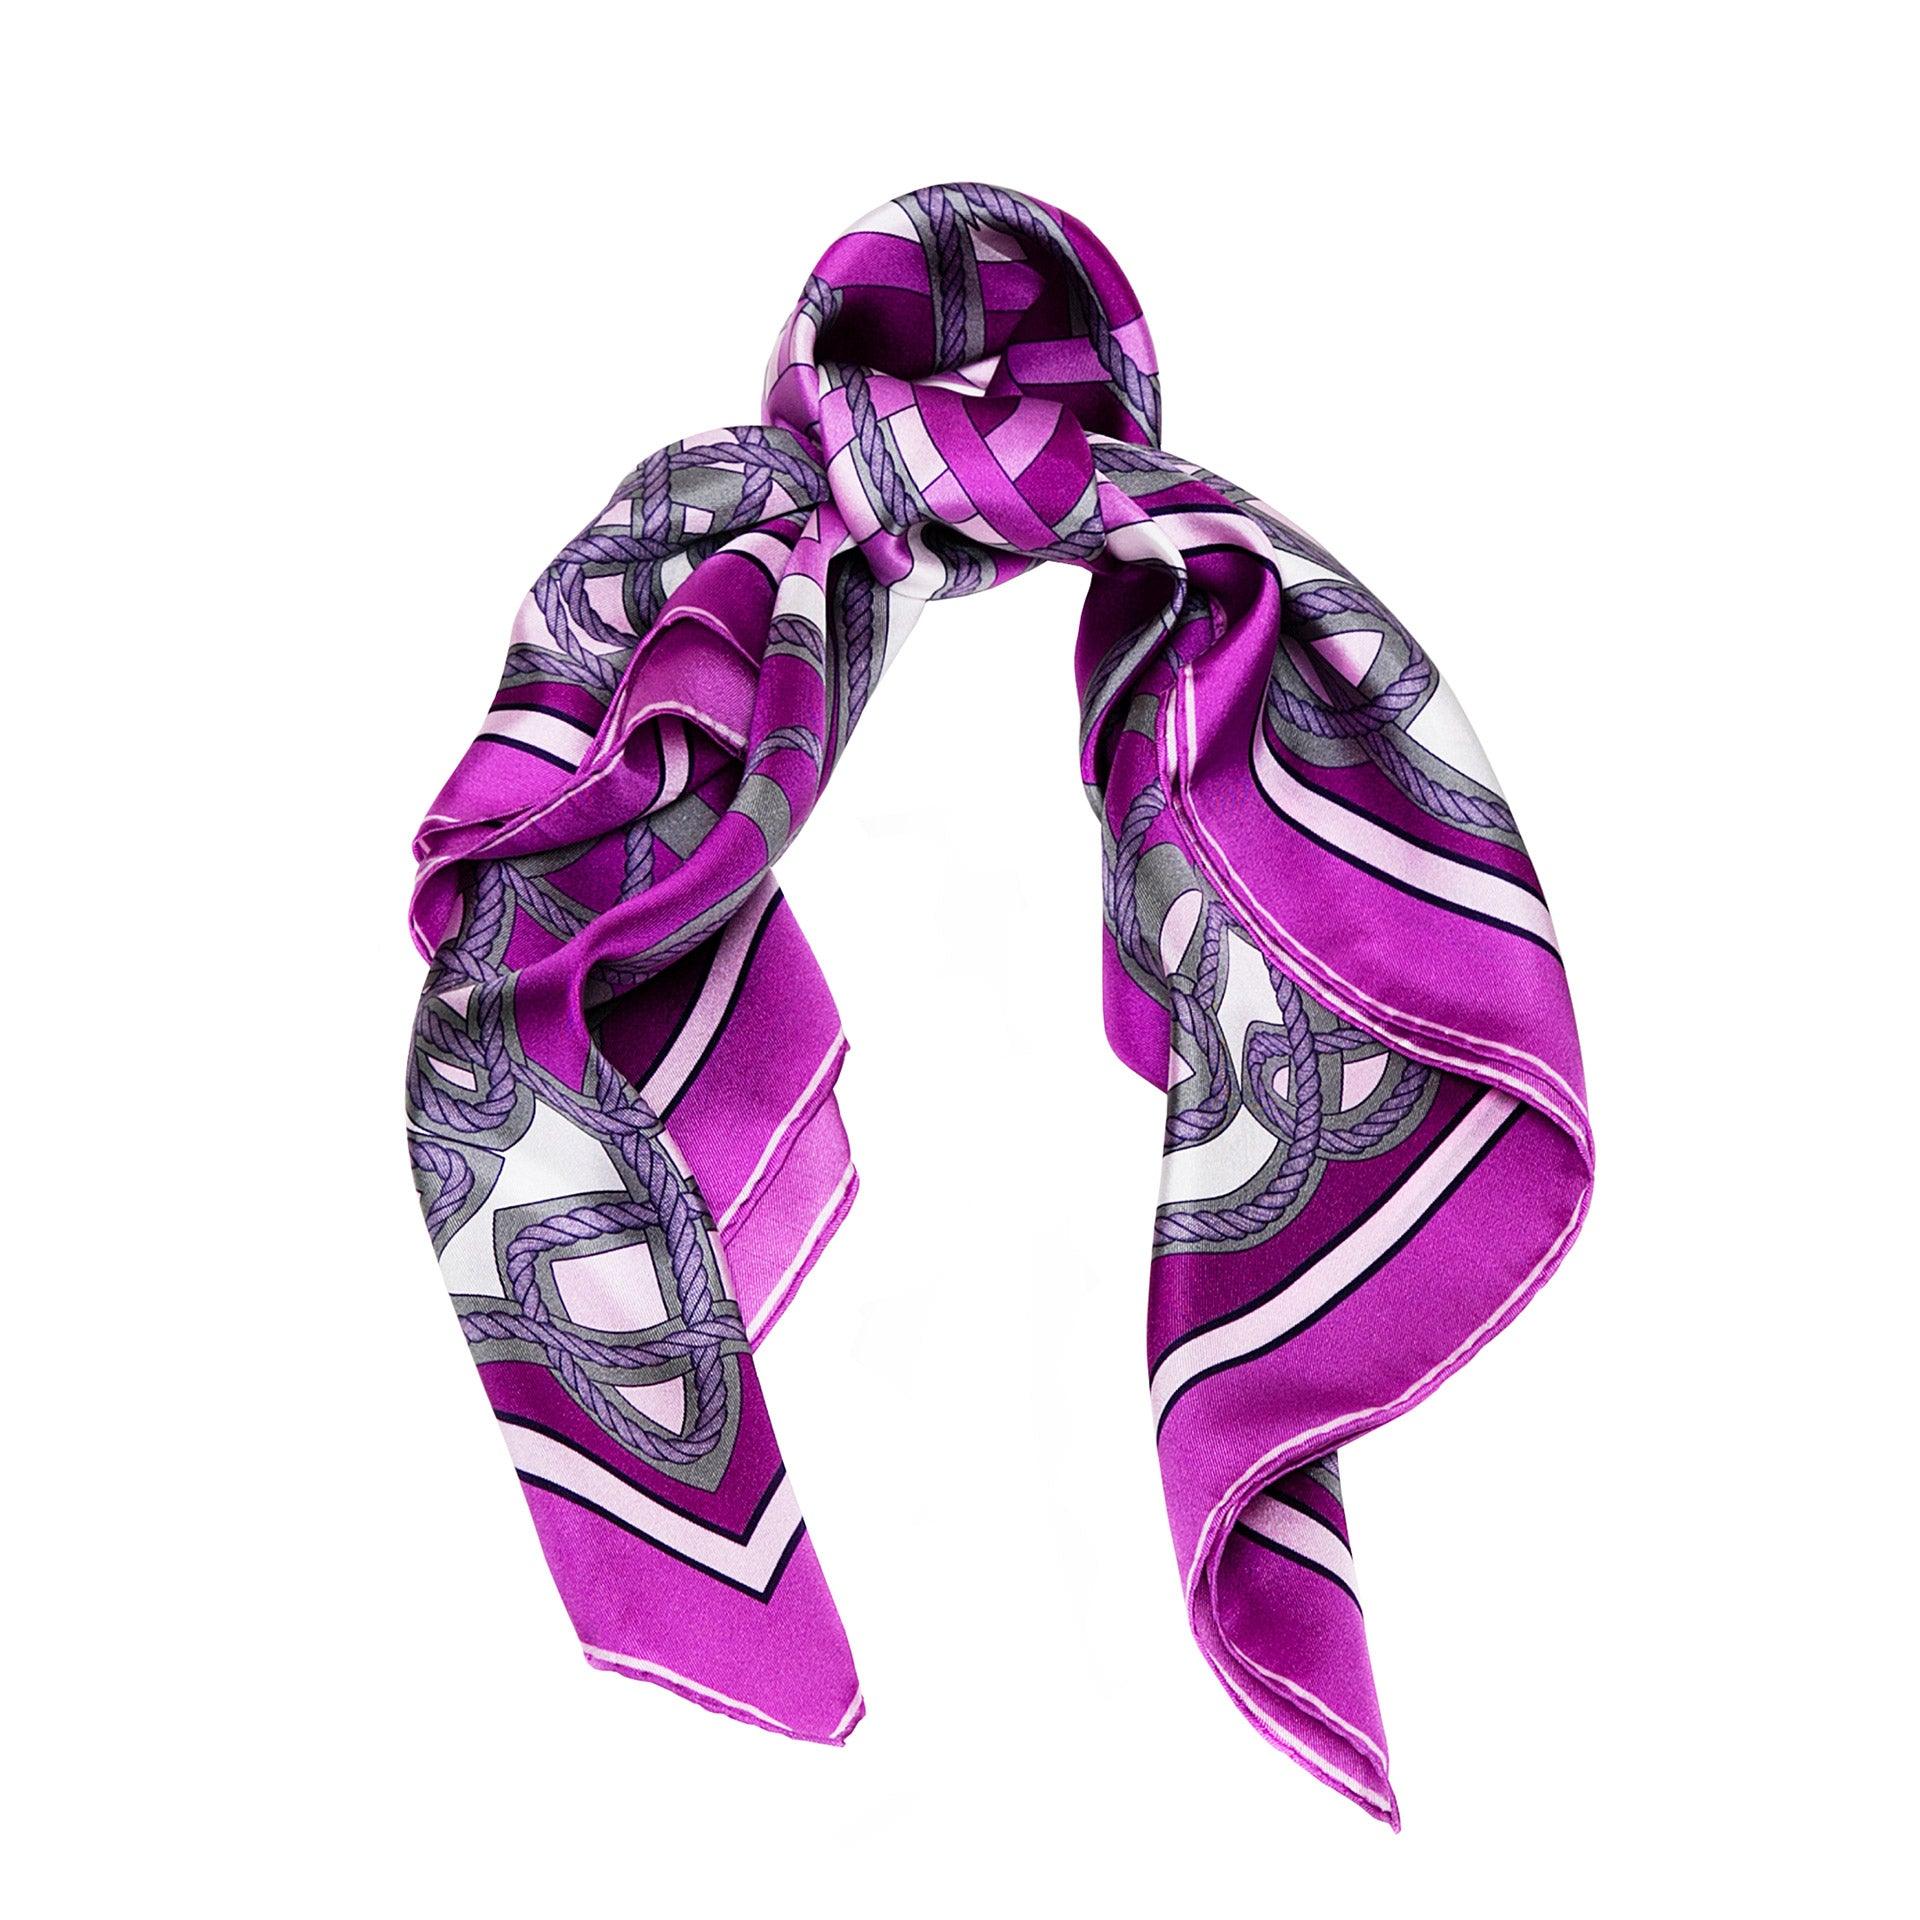 Violet Celtic Silk Scarf - A fusion of London's design and Italian craftsmanship, a luxurious gift choice.